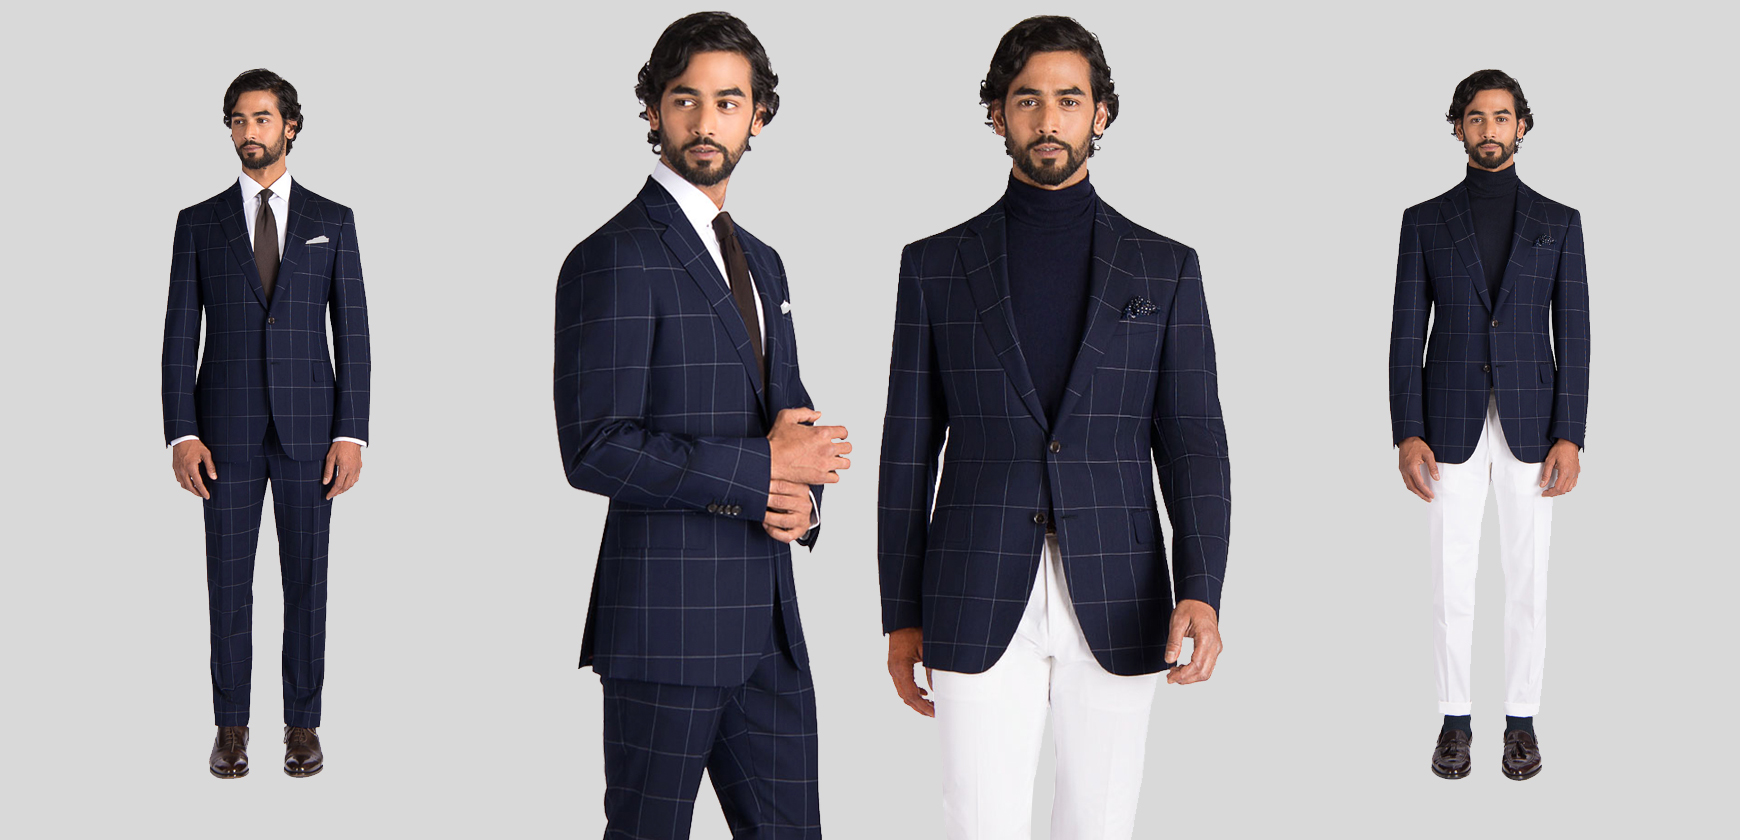 Sport Coat Vs Blazer: Is There Even A Difference?